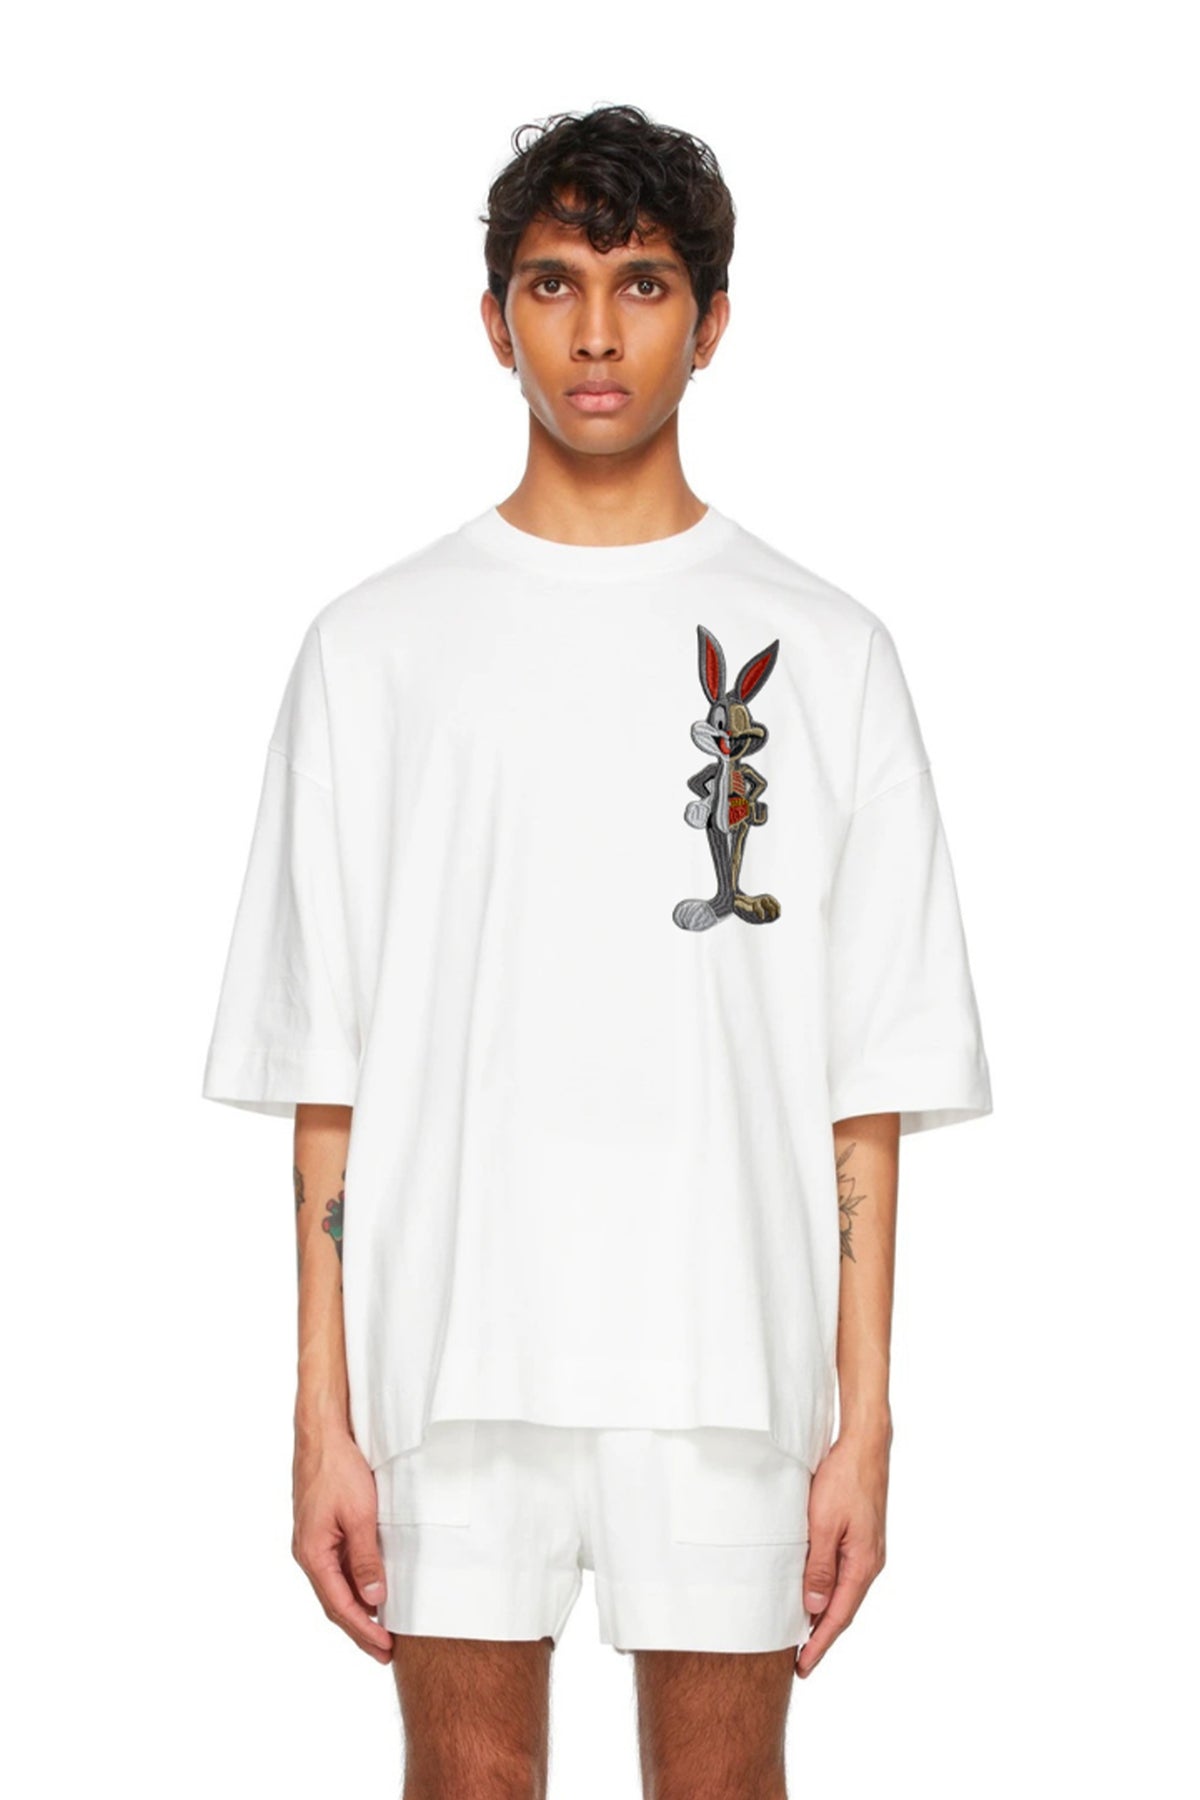 TWISTED BUNNY CLASSIC T-SHIRT